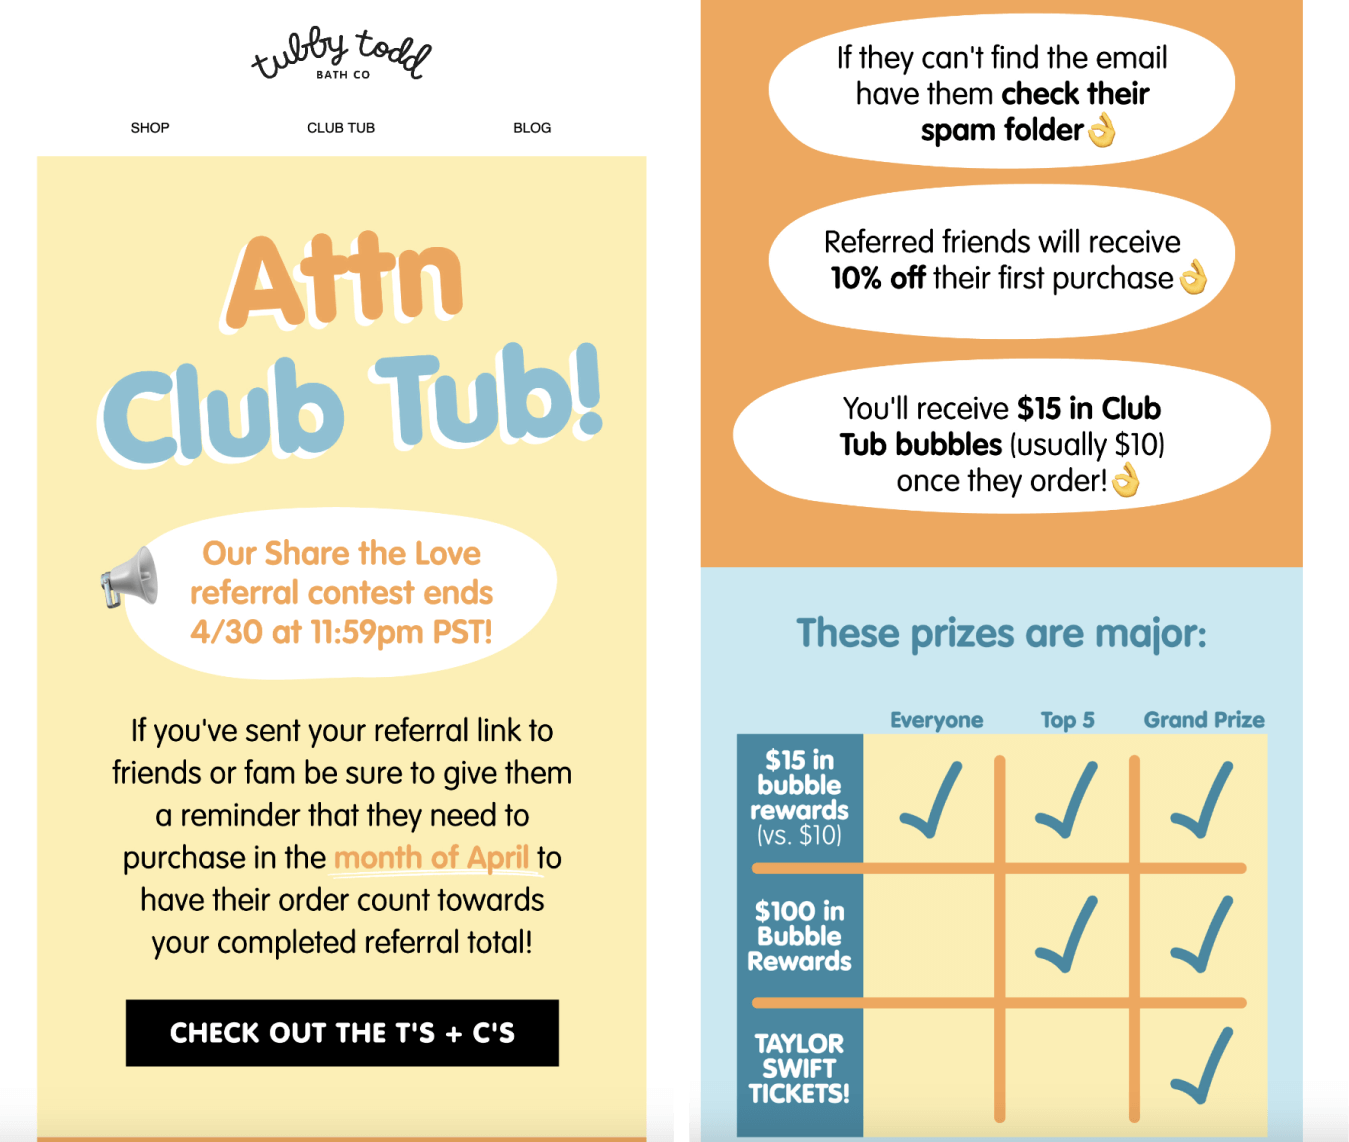  A screenshot of an email from Tubby Todd explaining its Share the Love referral contest. The text says: Attn Club Tub! Our Share the Love referral contest ends 4/30 at 11:59 pm PST! If you’ve sent your referral link to friends or fam be sure to give them a reminder that they need to purchase in the month of April to have their order count towards your completed referral total! Check out the T’s and C’s. There are then graphics explaining further details: If they can’t find the email have them check their spam folder. Referred friends will receive 10% off their first purchase. You’ll receive $15 in Club Tub bubbles (usually $10) once they order!It concludes with a graph showing what prizes are available: $15 in bubble rewards (vs. $10) is offered to everyone, $100 in Bubble Rewards is available to the Top 5 and the Grand Prize winner, and Taylor Swift tickets are available to the Grand Prize winner. 